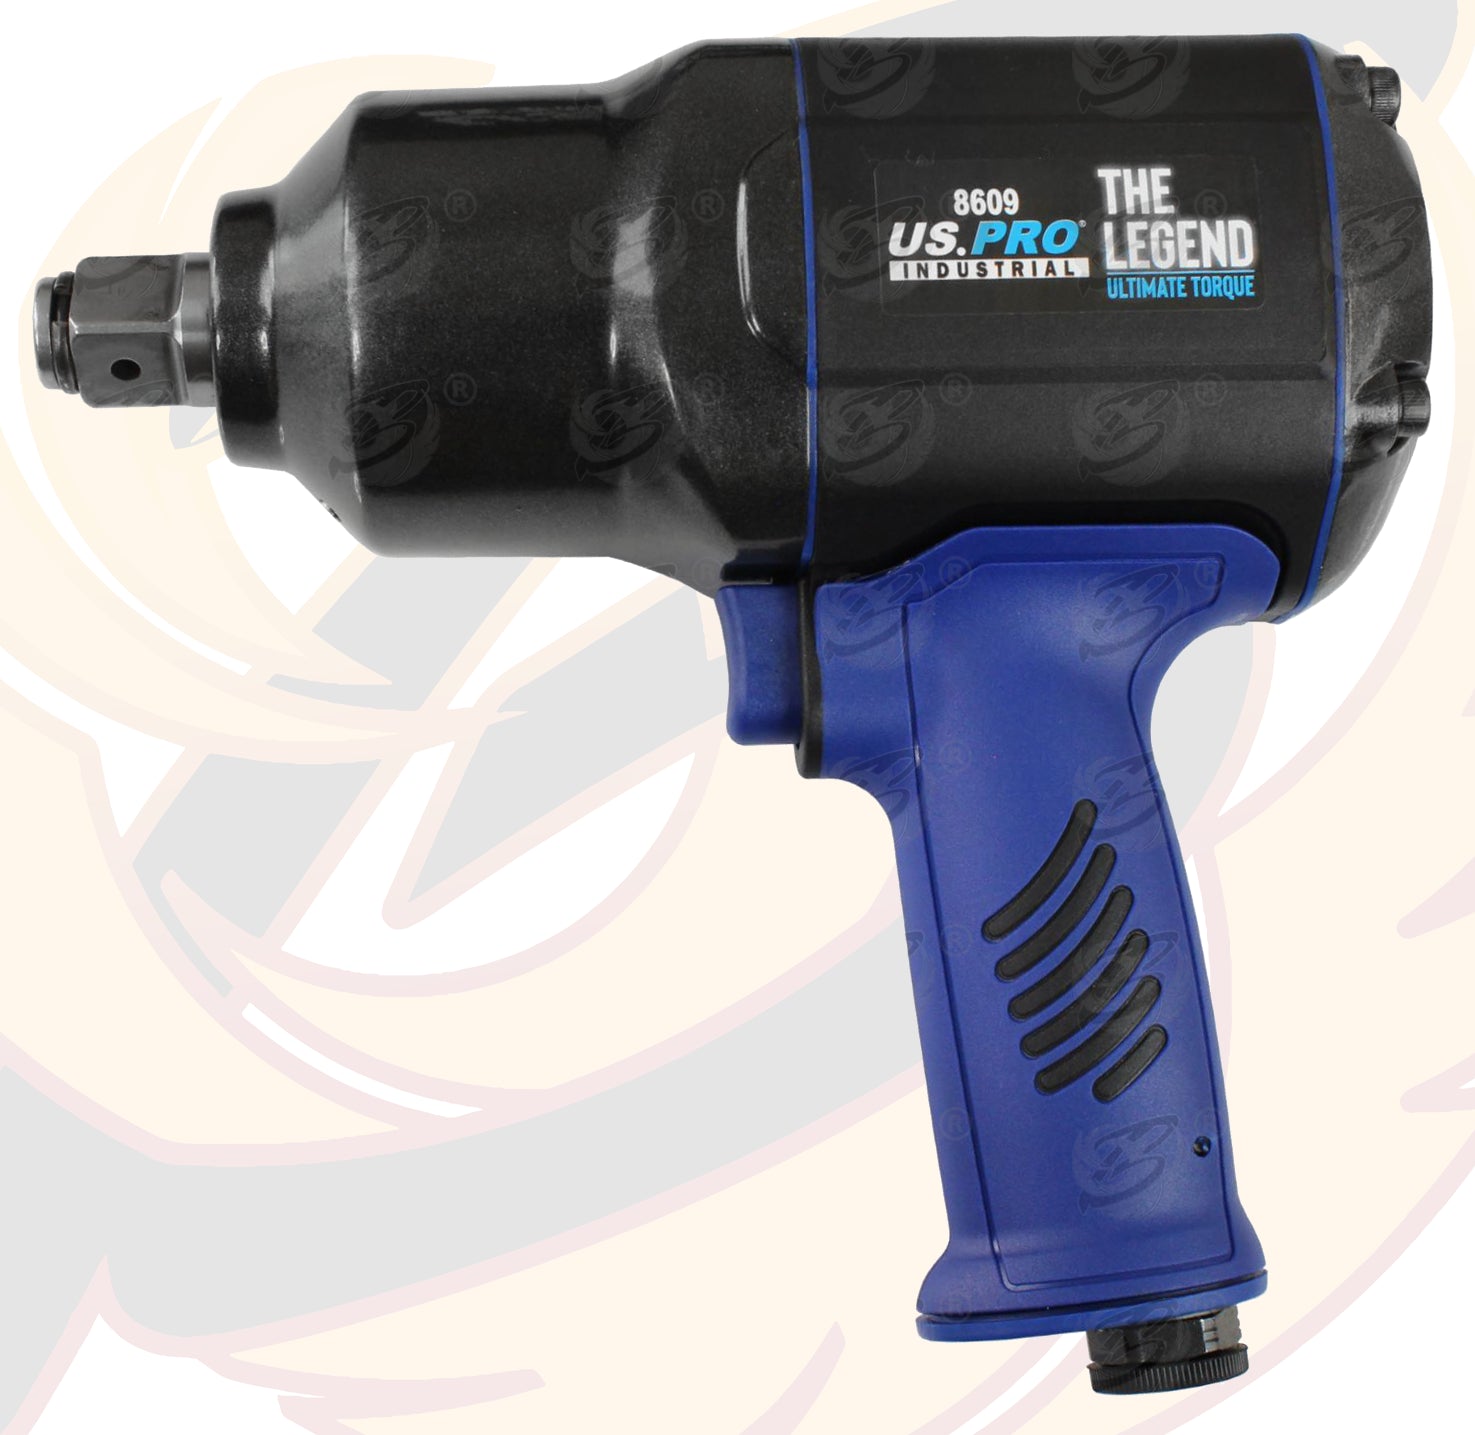 US PRO 3/4" DRIVE AIR IMPACT WRENCH 2500Nm ( THE LEGEND ) & 17MM - 19MM - 21MM DEEP IMPACT SOCKETS